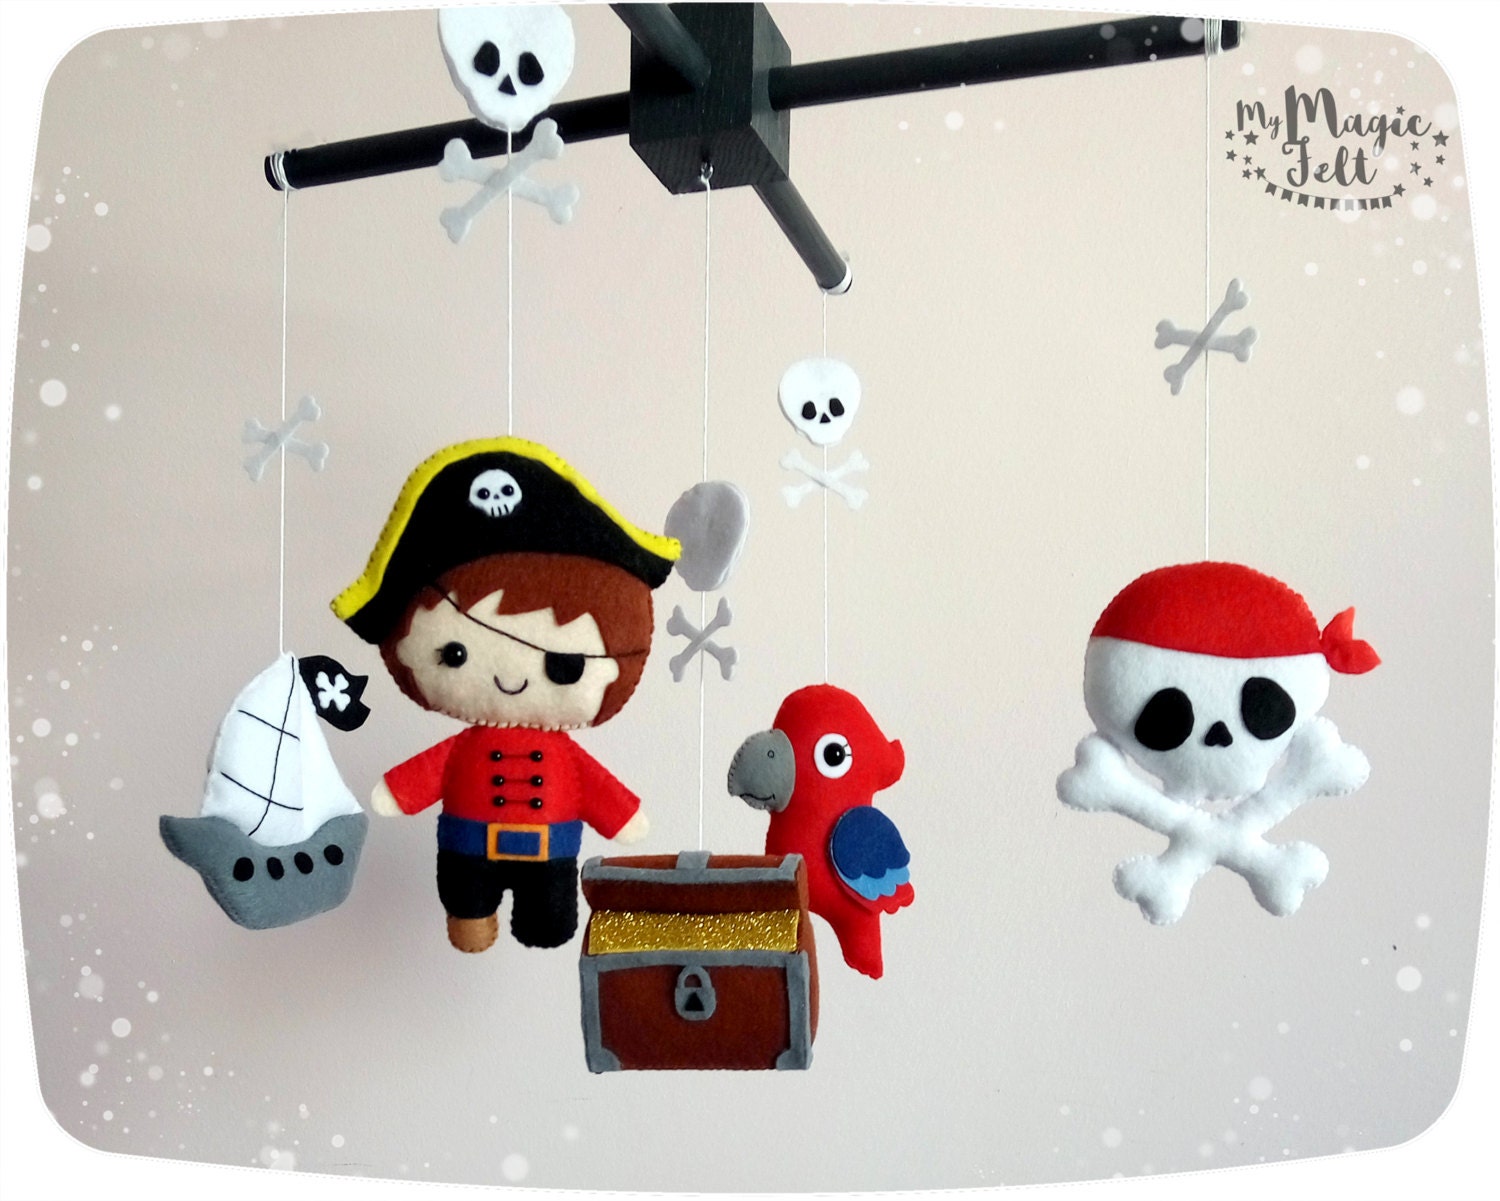 Baby mobile pirate Baby boy mobile pirates Nursery mobile